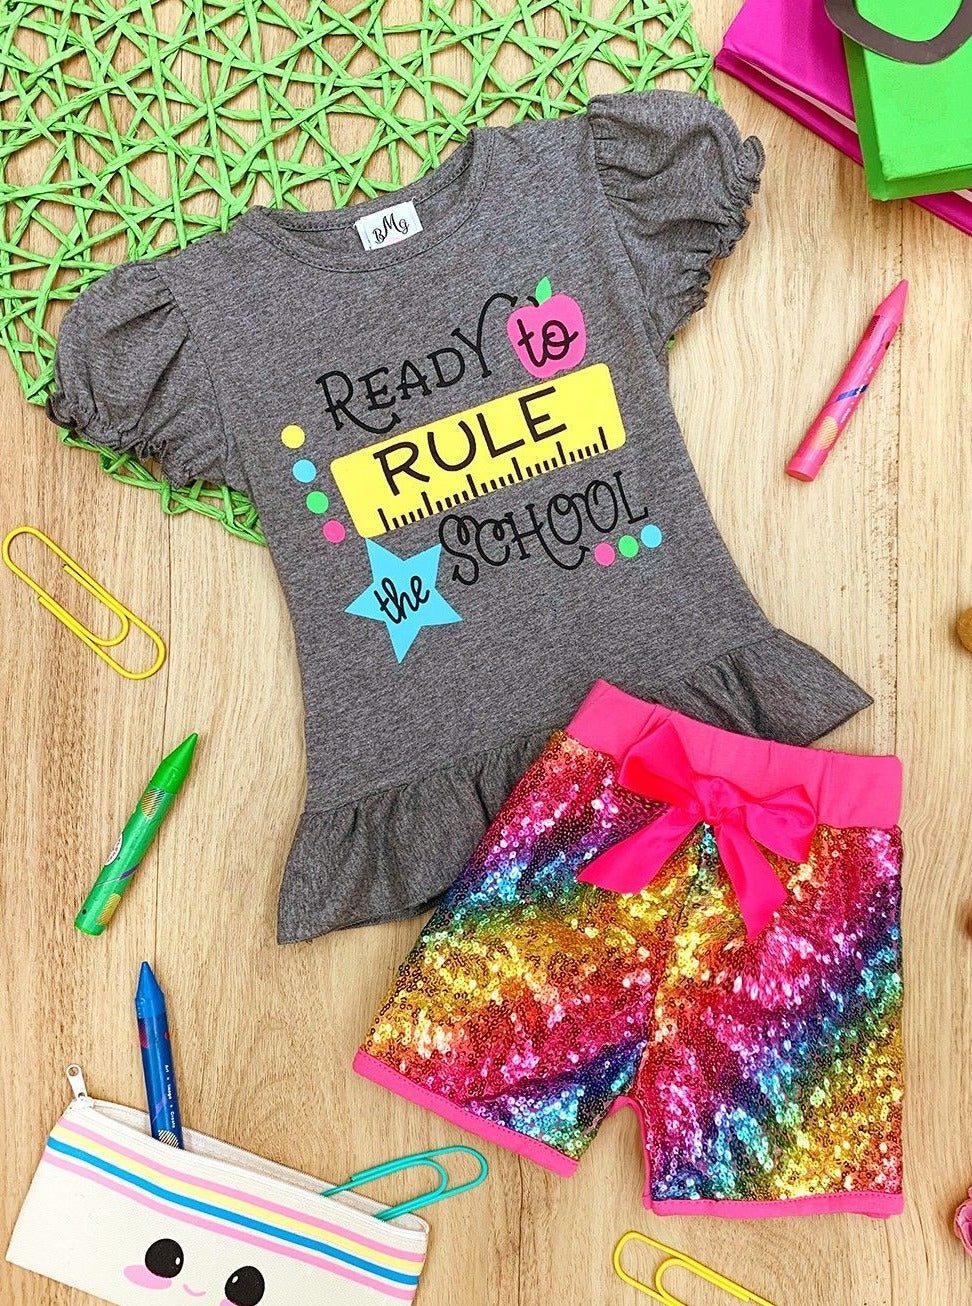 Little girls back to school "Ready to Rule the School" graphic ruffle top with short sleeves and rainbow sequin mesh shorts with bow - Mia Belle Girls